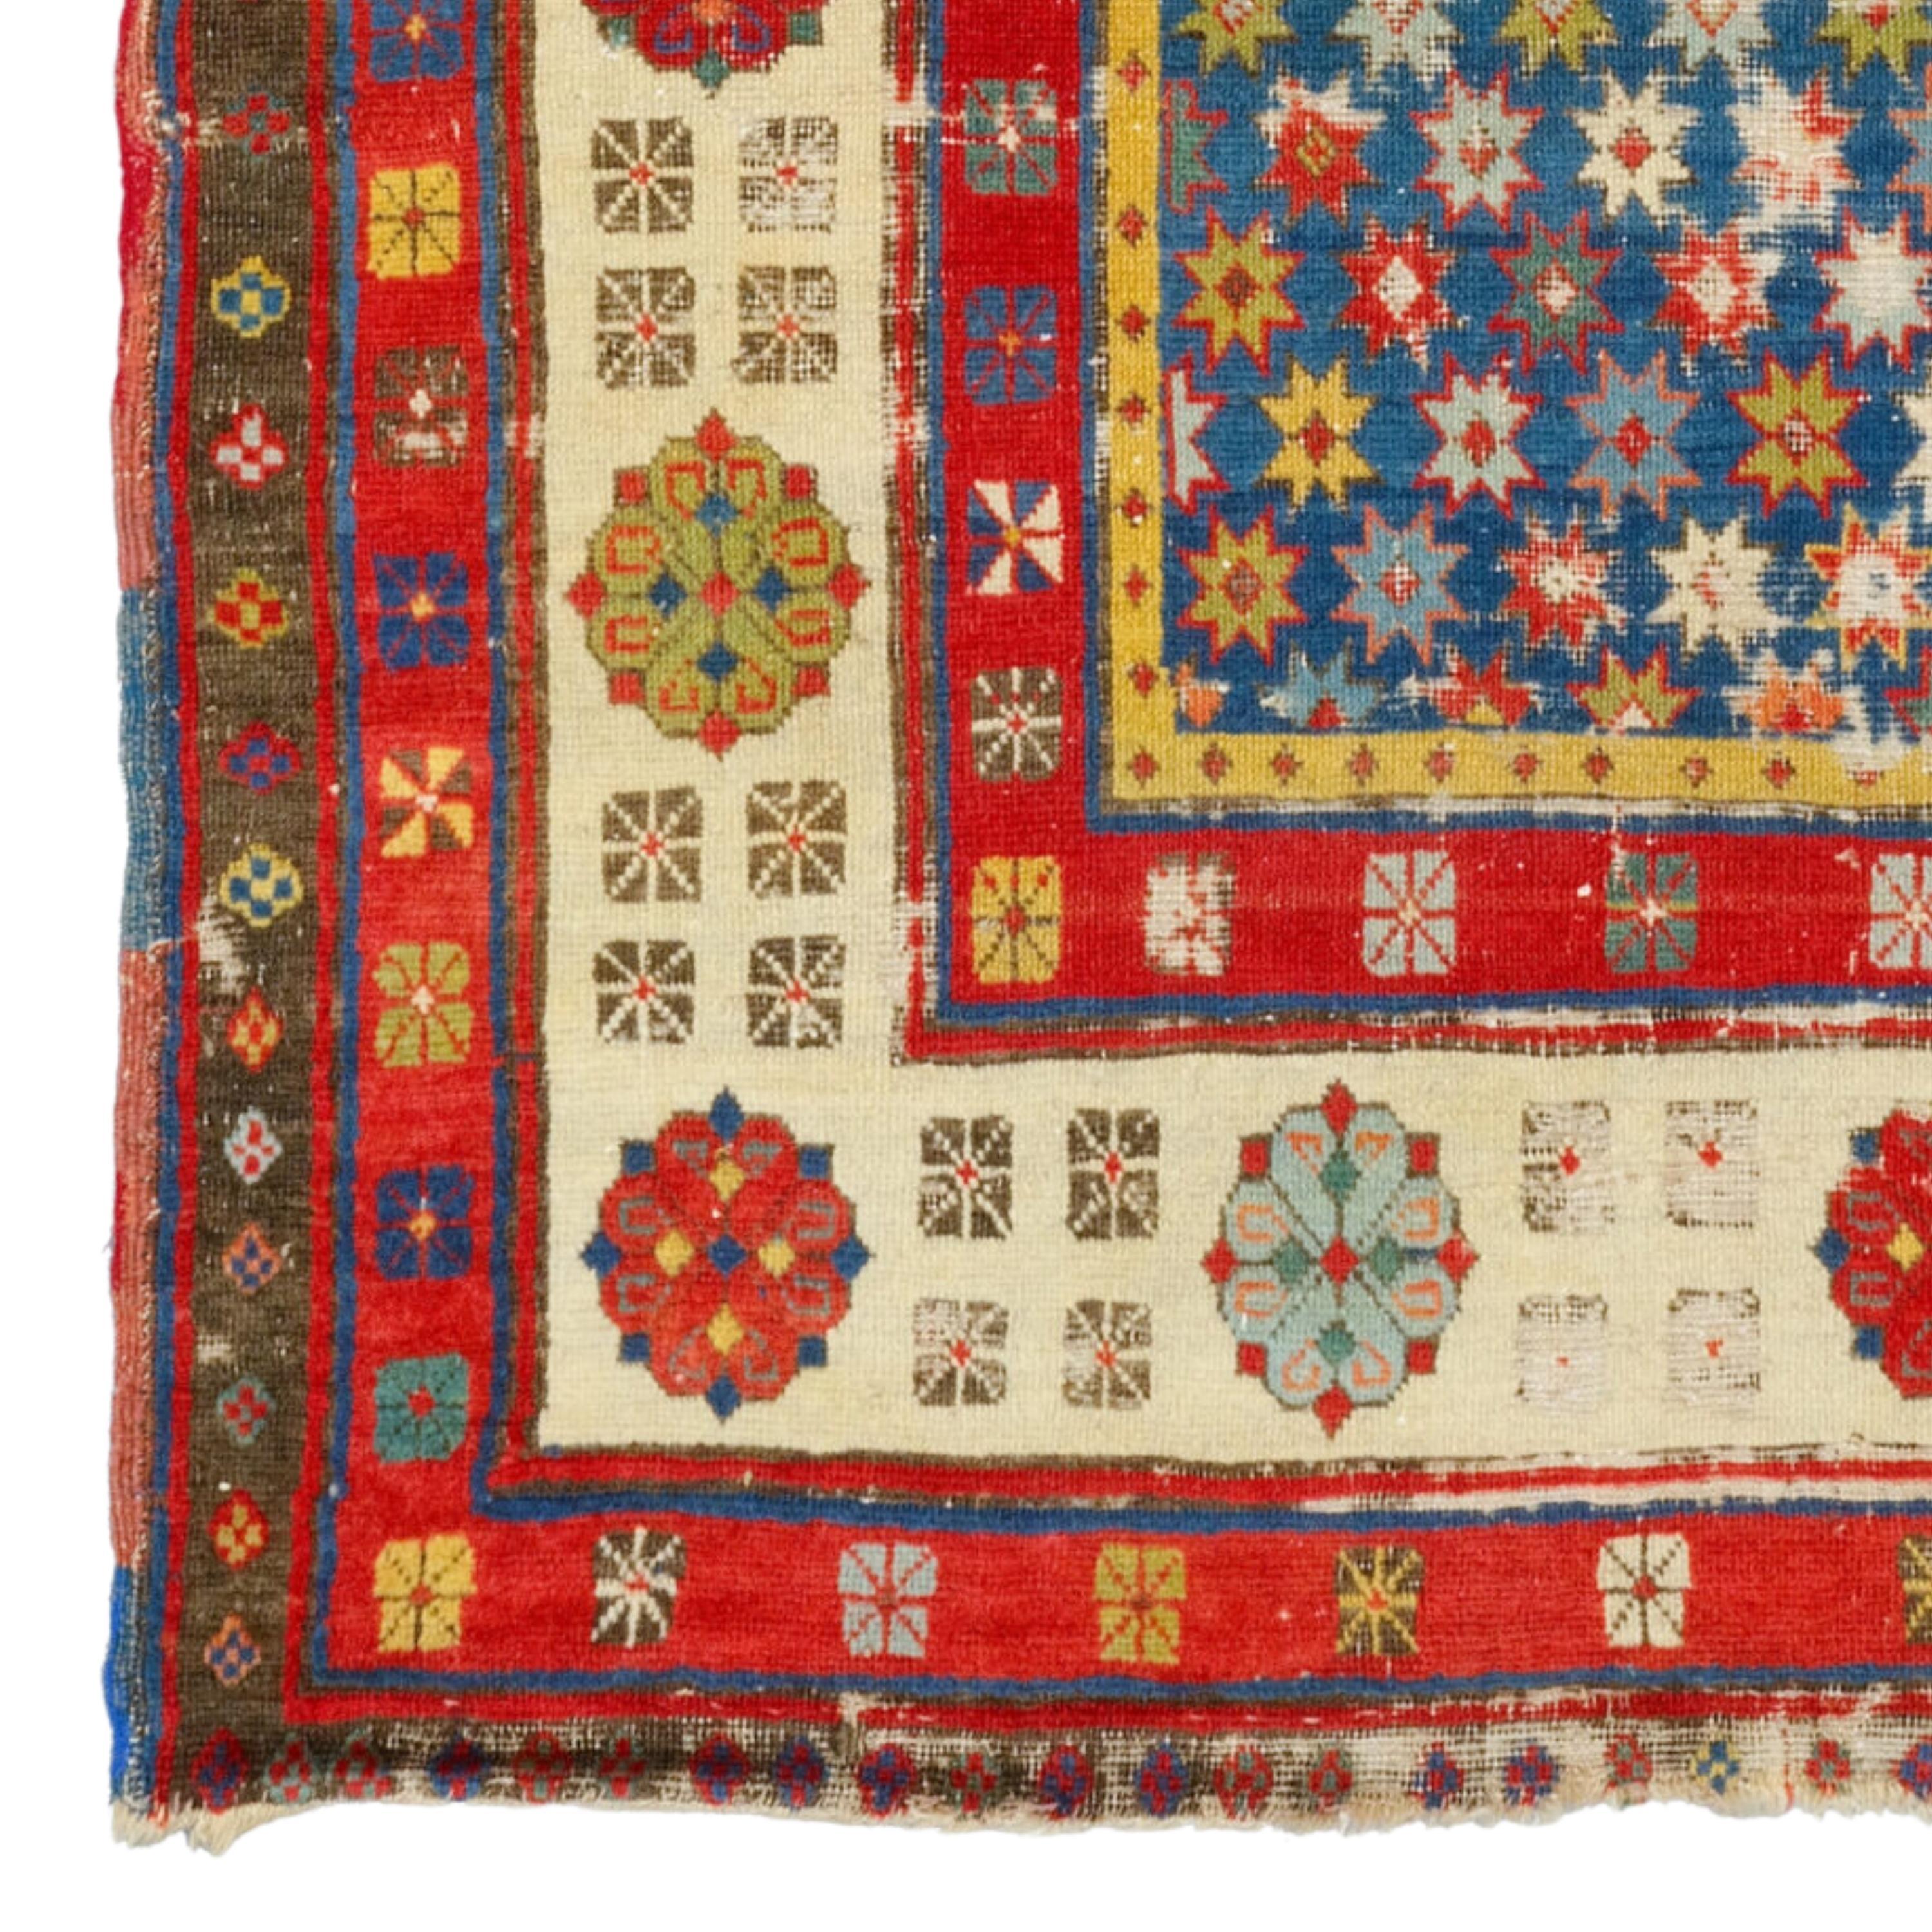 Antique Talish Rug
Late Of The 19th Century Caucasian Talish Rug
Size: 105 x 170 cm (41,3x66,9 In)

Typical Talish rugs are longer than they are wide, and have beautiful deep colors.